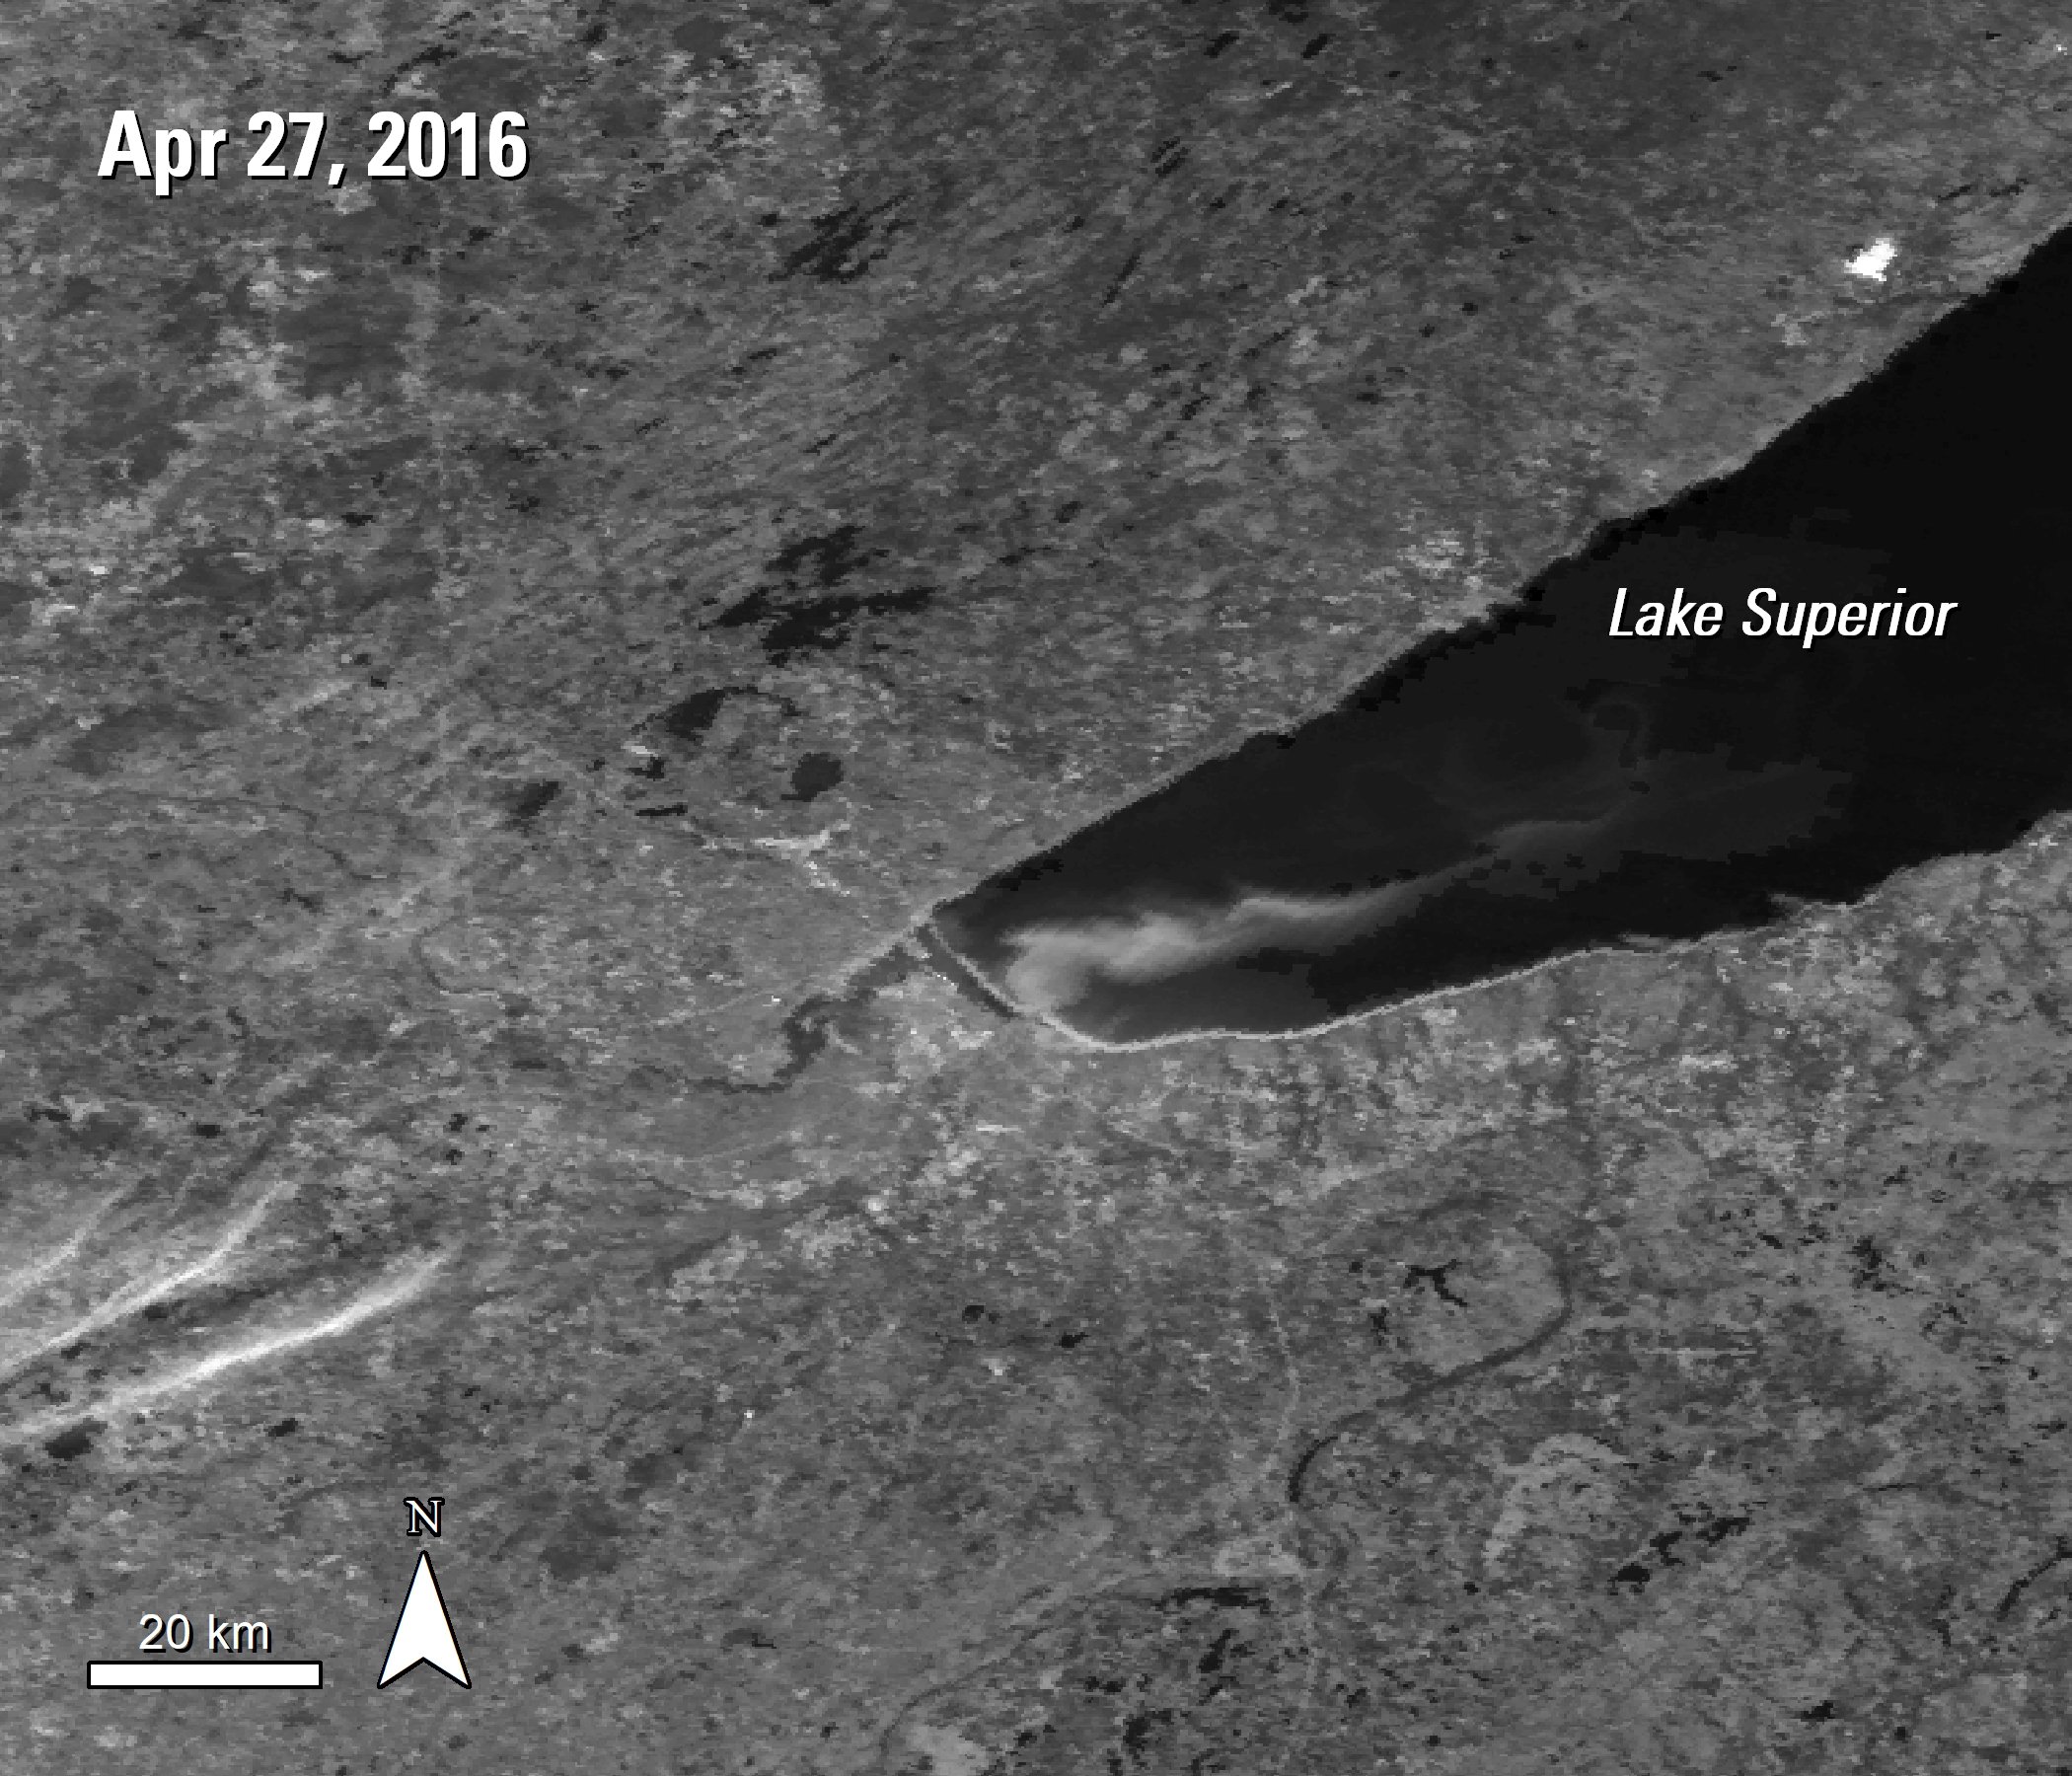 A black and white MODIS Surface Reflectance image over Lake Superior, Minnesota and Wisconsin, United States. A plume is visible over the bottom left portion of this section of the lake, acquired April 27, 2016.